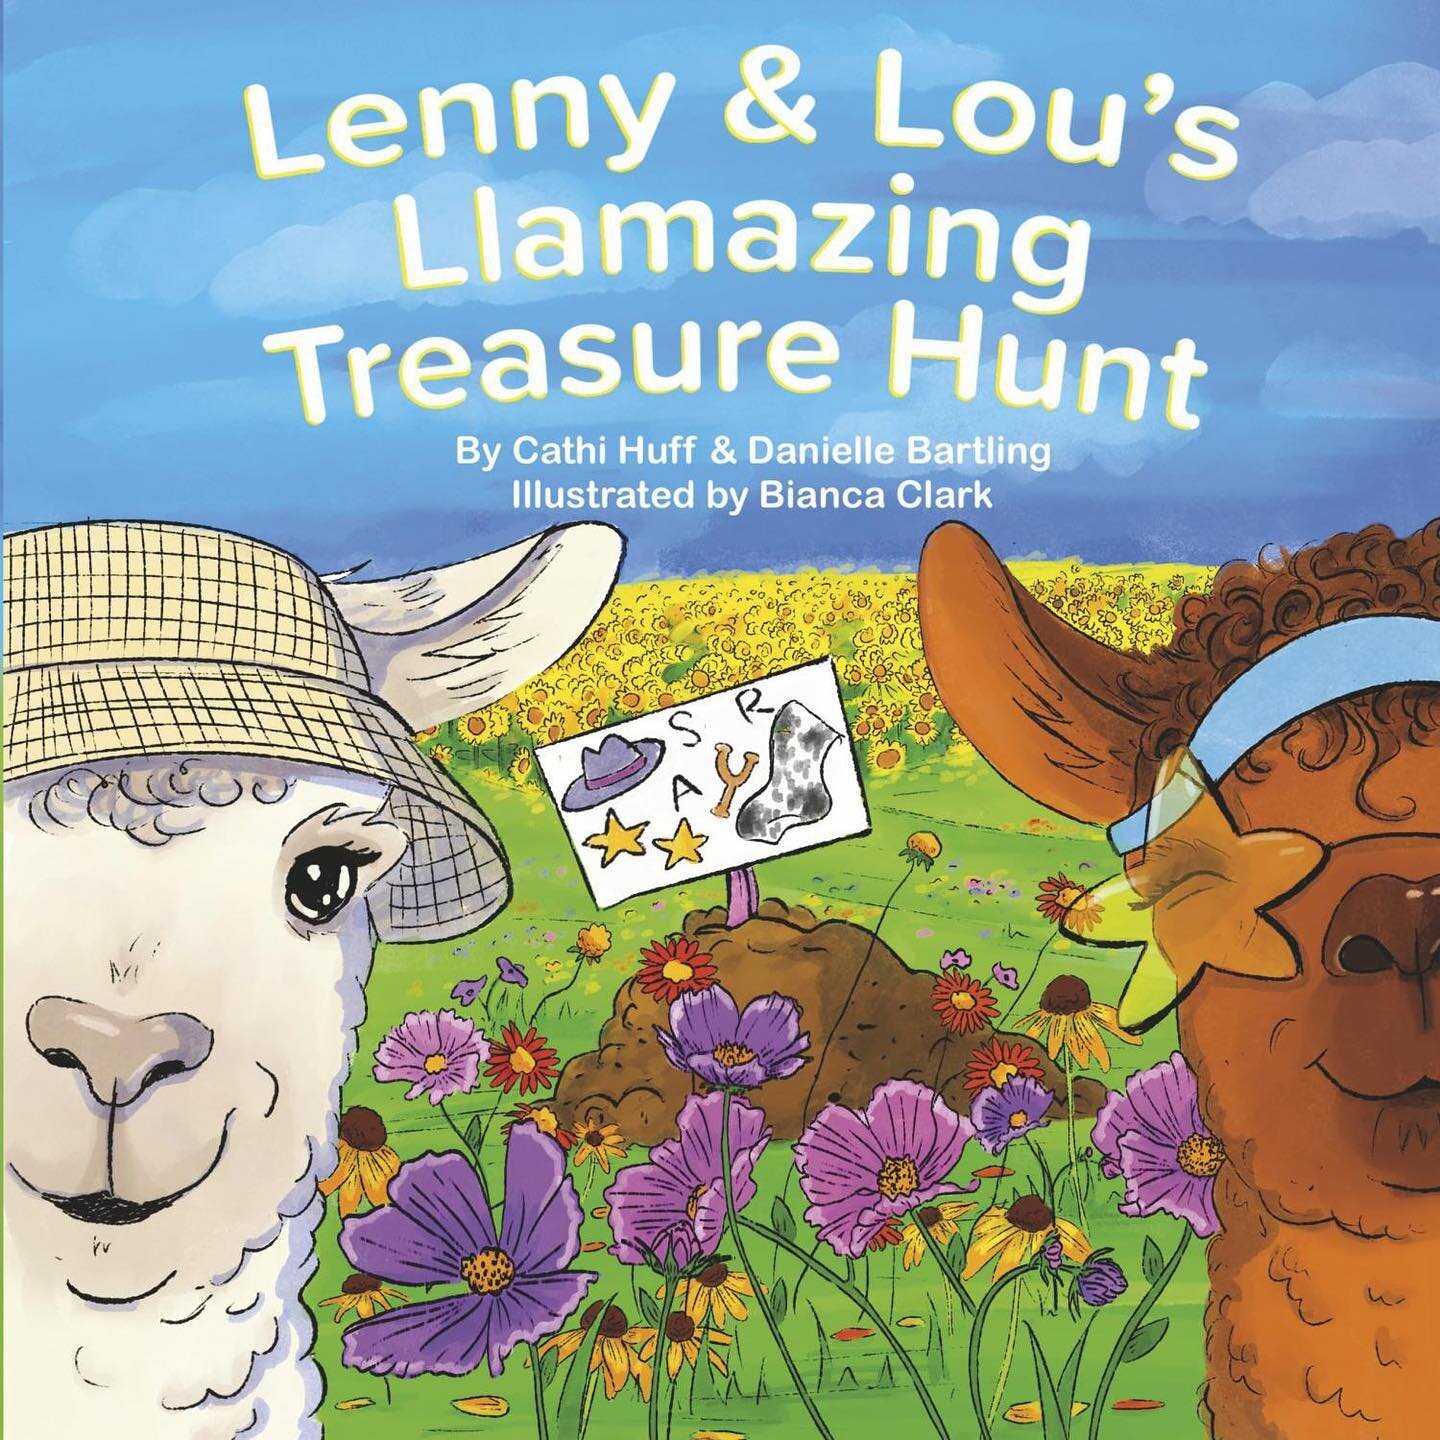 The moment we&rsquo;ve all been waiting for, especially @lennynlou, is finally here! 🦙🤩 &quot;Lenny and Lou's Llamazing Treasure Hunt&quot; is NOW AVAILABLE ON BOOKSHOP! 📗✨

🔍 Inspired by real-life animals at Atlantis Dream Farm, this vibrant fam